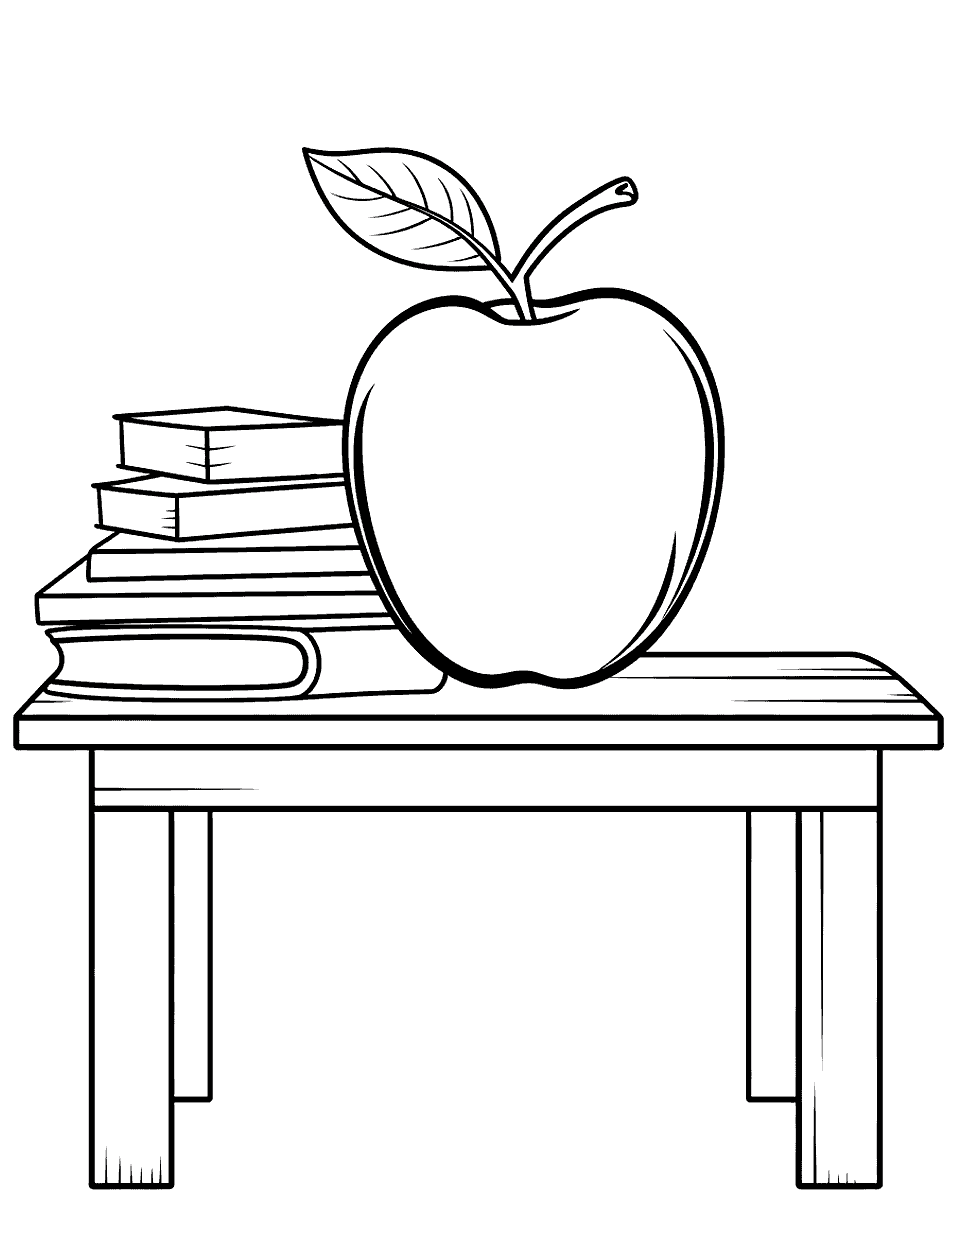 Big Apple on a Desk Coloring Page - A big apple sitting on a school desk with books.